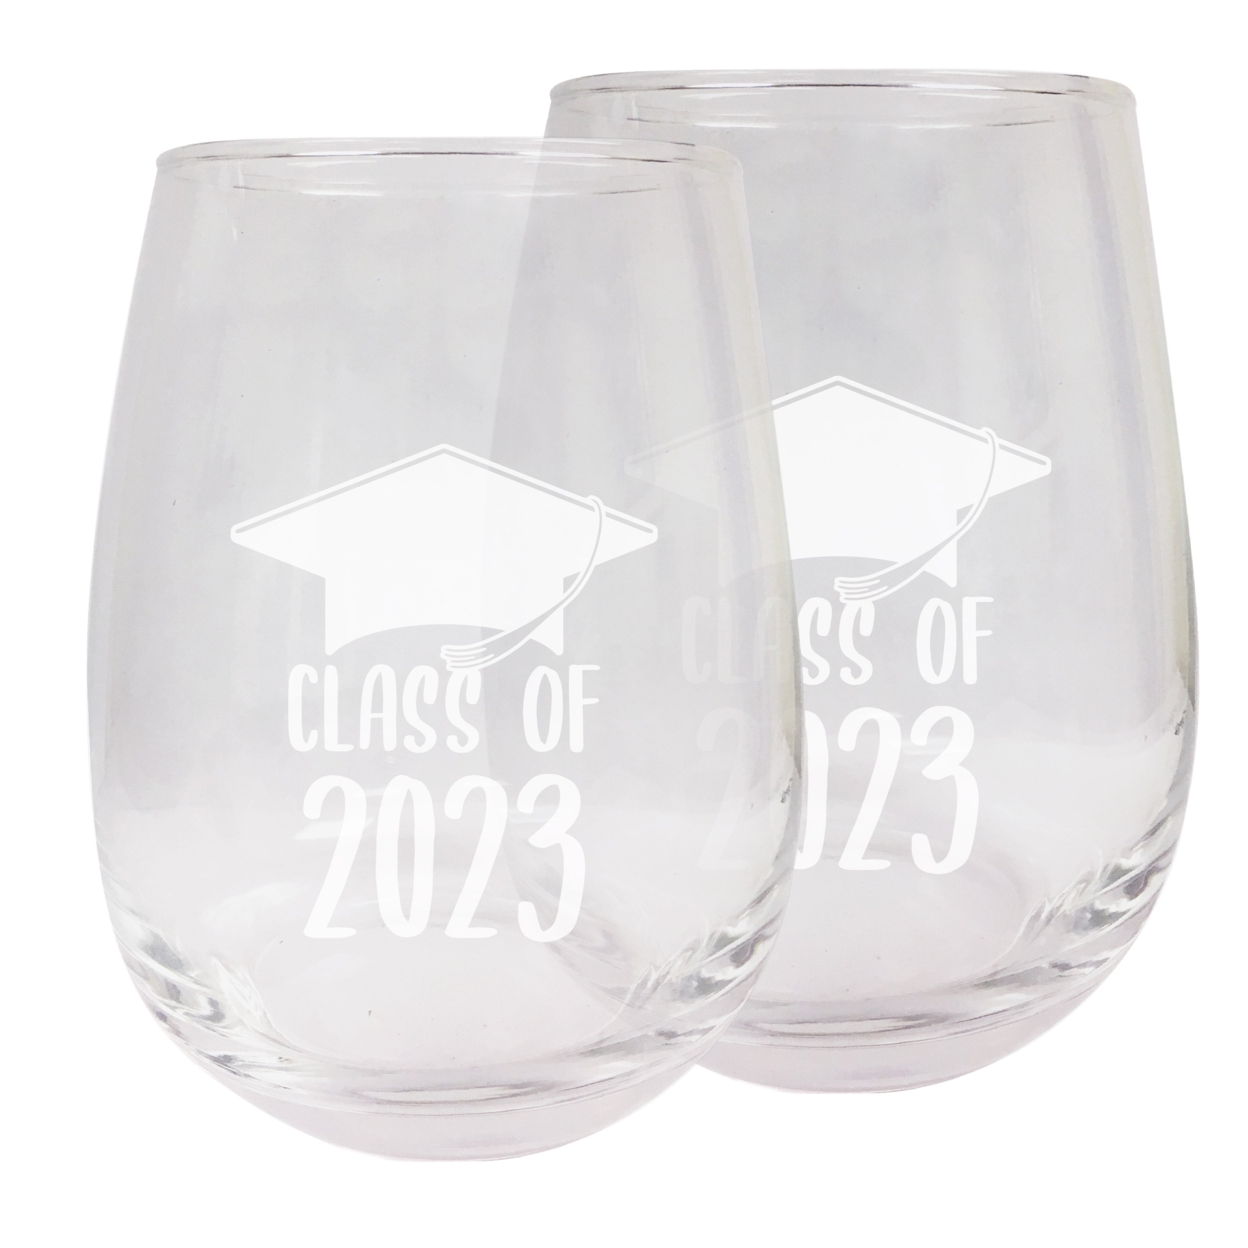 Class Of 2023 Grad Senior 15oz Etched Stemless Wine Glass - B, 2-Pack